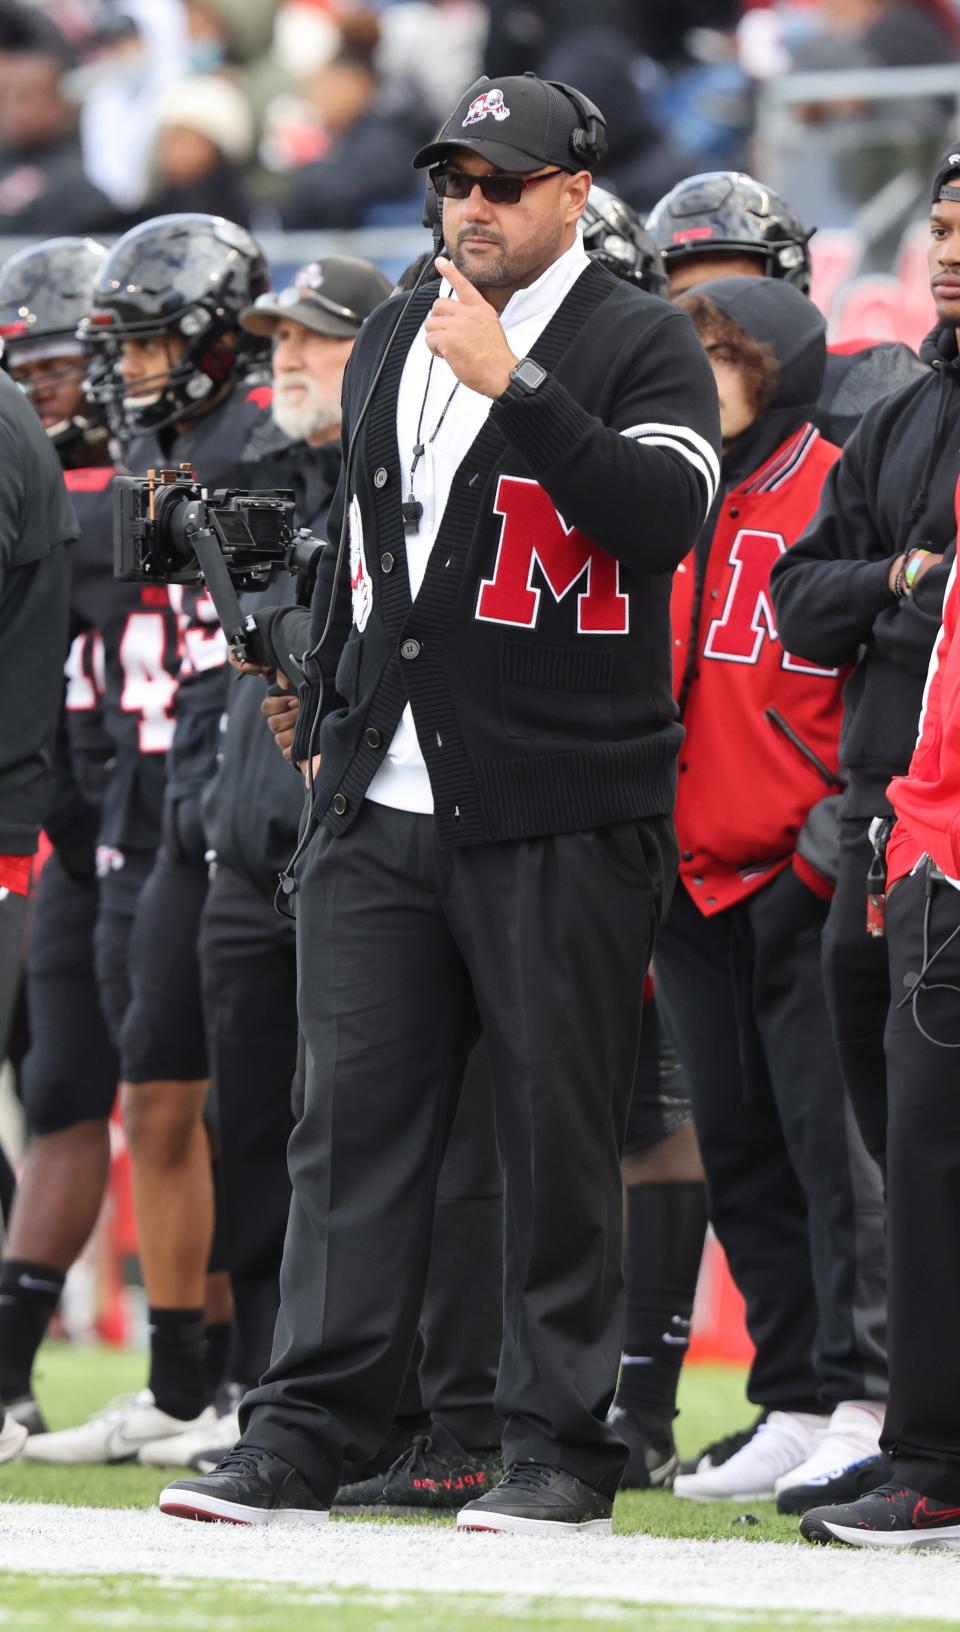 McKinley head coach Antonio Hall watches his team during an Oct. 23, 2021 high school football game against Massillon at Tom Benson Hall of Fame Stadium.